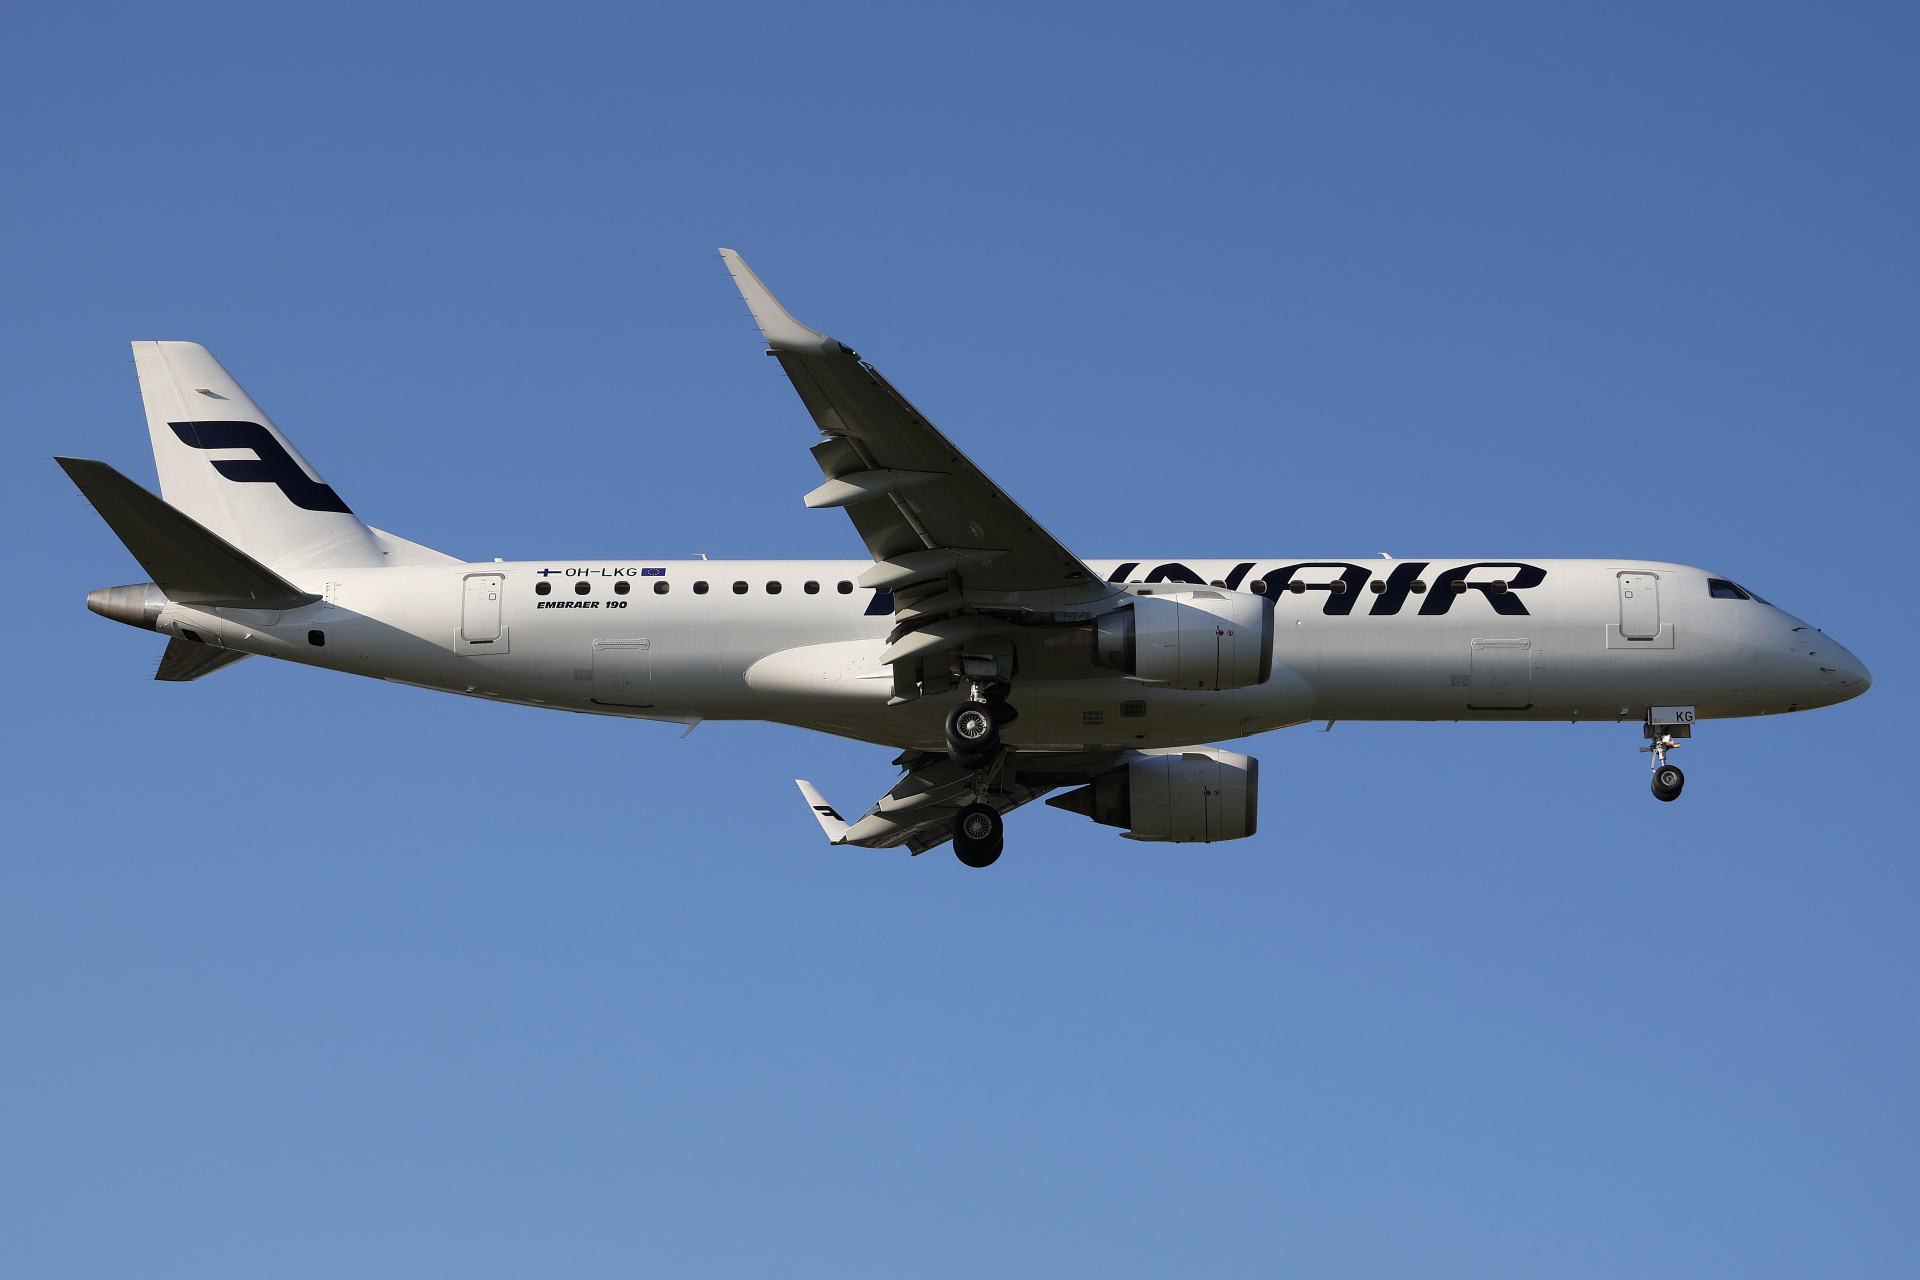 OH-LKG (new livery) (Aircraft » EPWA Spotting » Embraer E190 » Finnair)